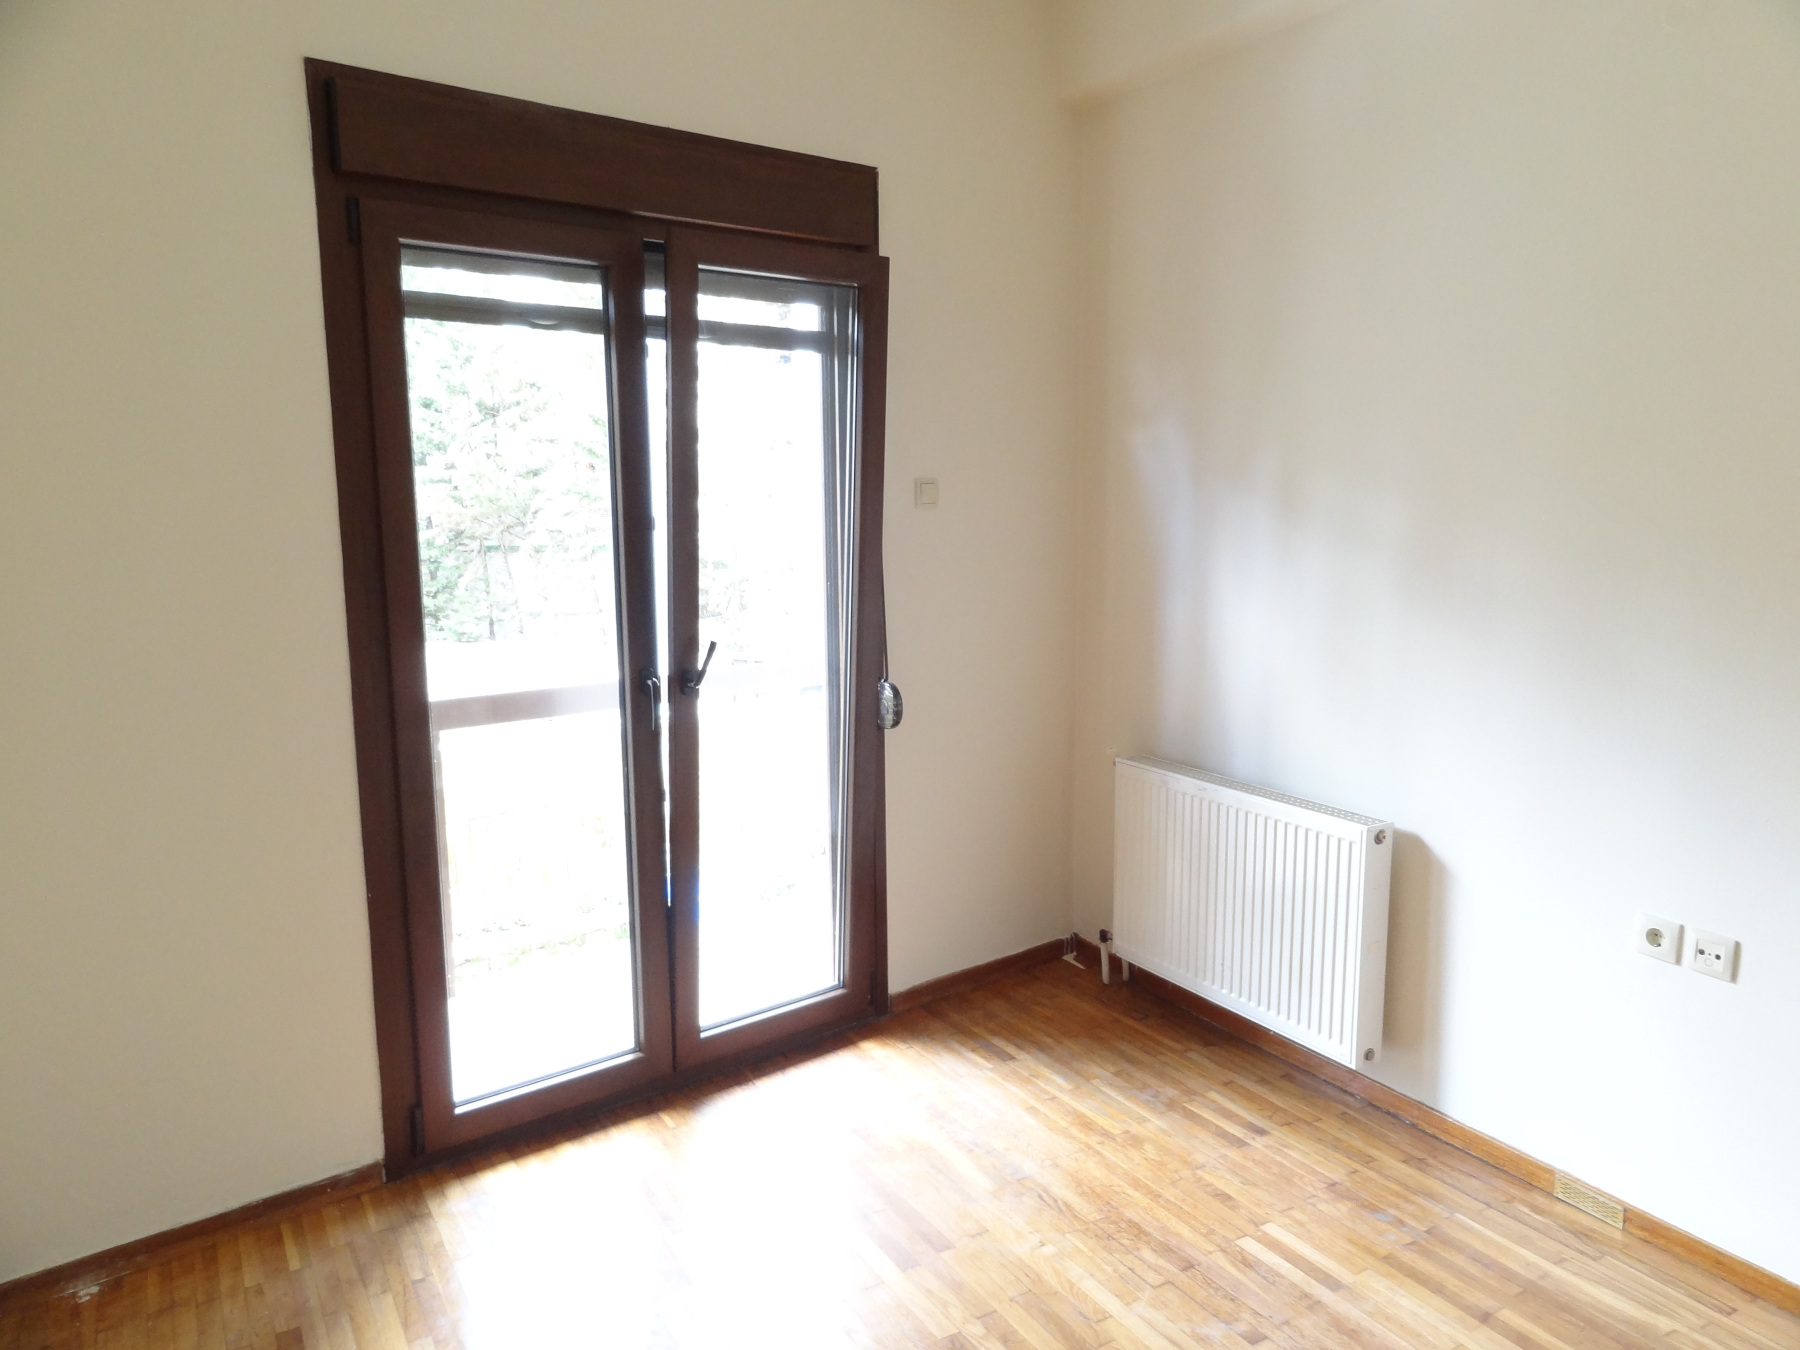 Two-rooms studio for rent, 30 sq.m. 1st floor in the center of Ioannina near Dodoni Avenue